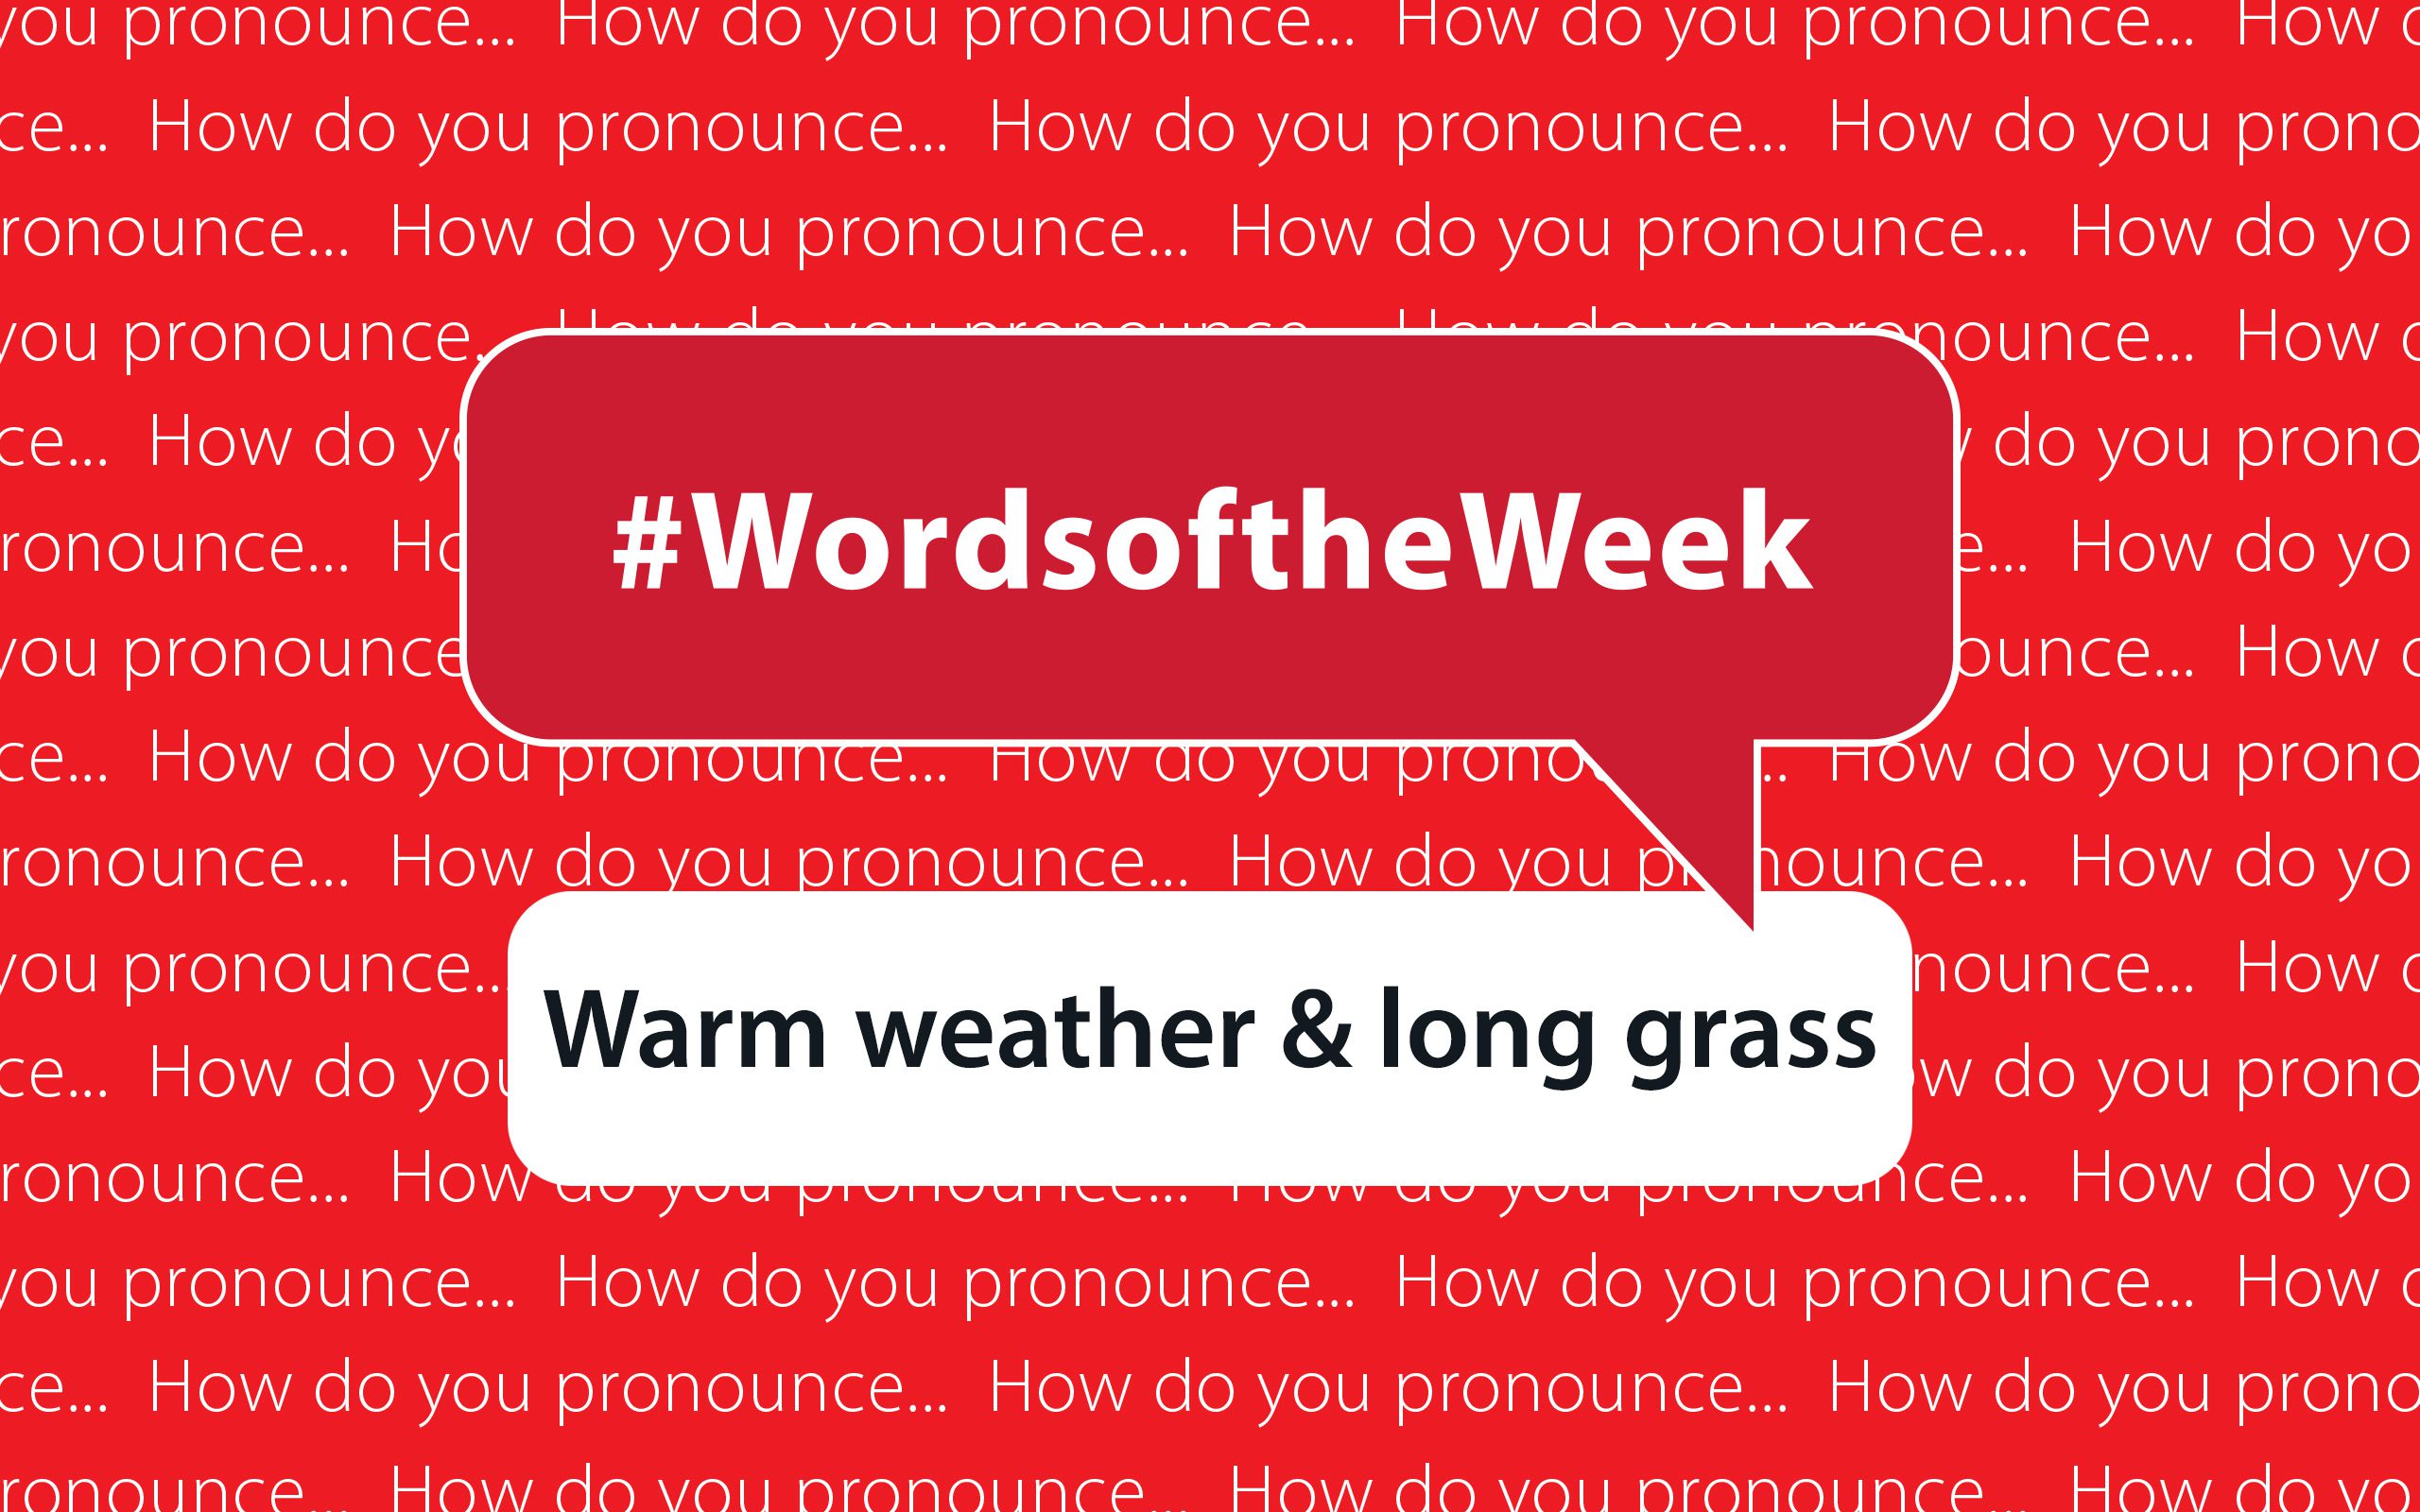 Words Of the week - Warm weather & long grass